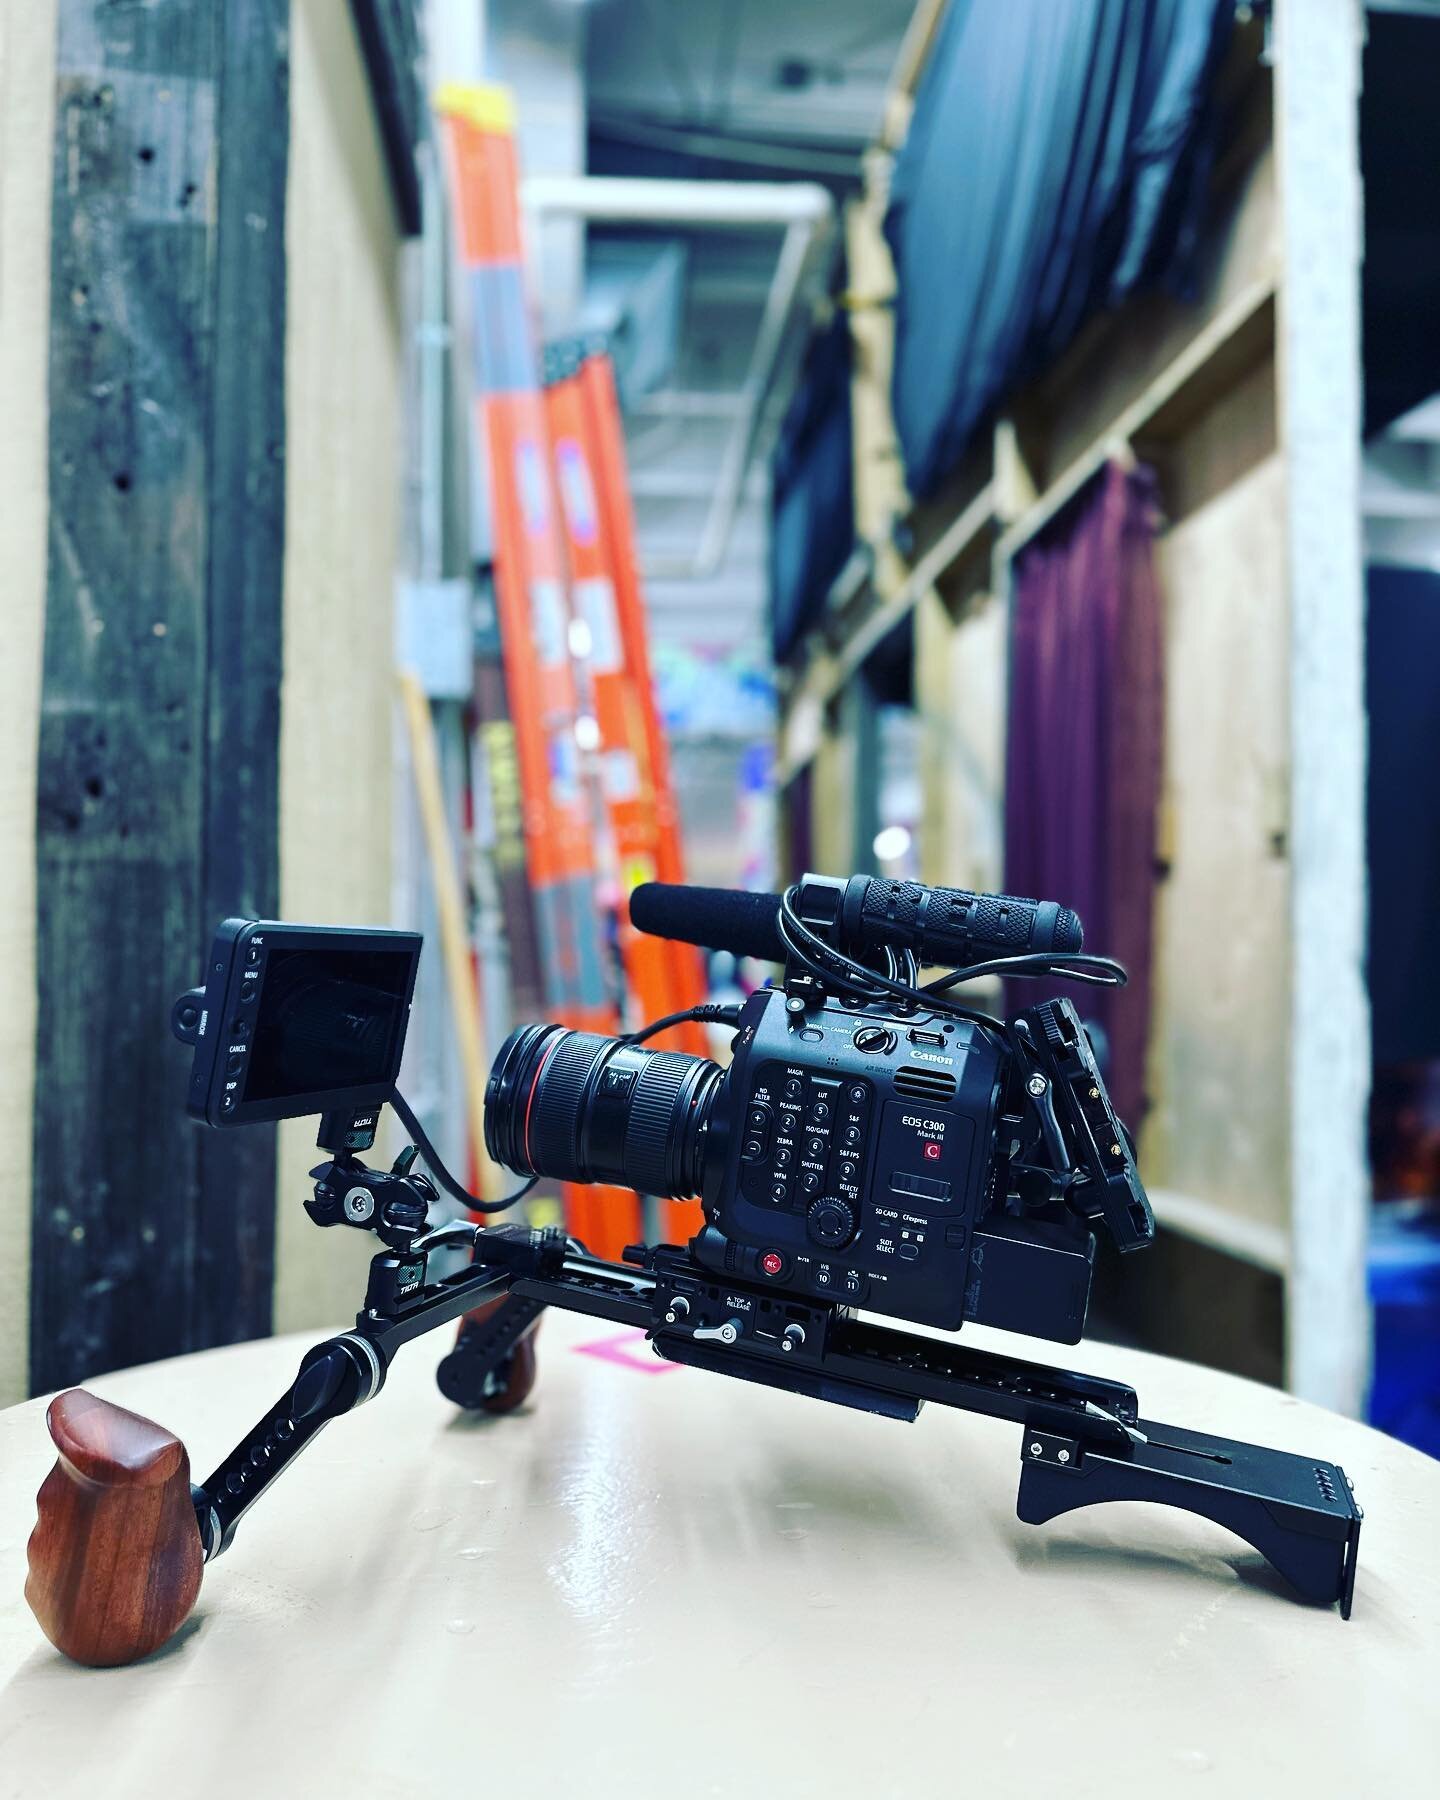 Out here at #ethdenver with #oplabs talking about all things #web3. This canon #c300 rig is great for events like this.

#canonc300markiii #c300mkii #canonusa #woodencamera